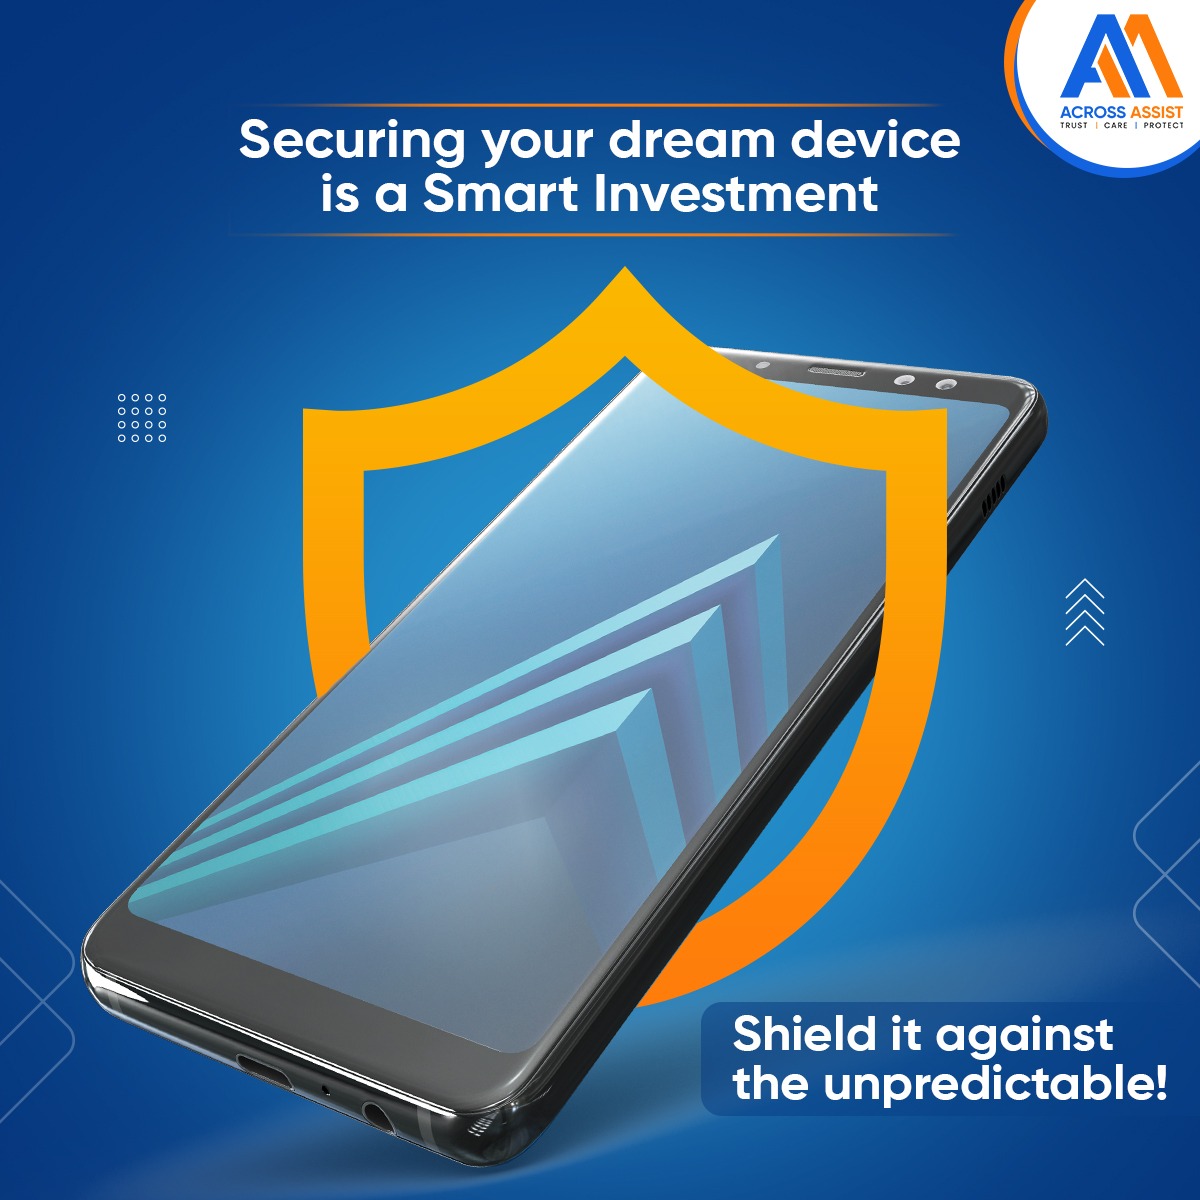 Ensure your dream device stays safe. Our trusted protection plans shield it from unwarranted situations.

#AcrossAssist #MobileProtection #ADLD #ExtendedWarranty #DeviceInsurance #MobileRepair #Insurance #MobileInsurance #DeviceInsurance #PhoneProtection #AccidentialDamage